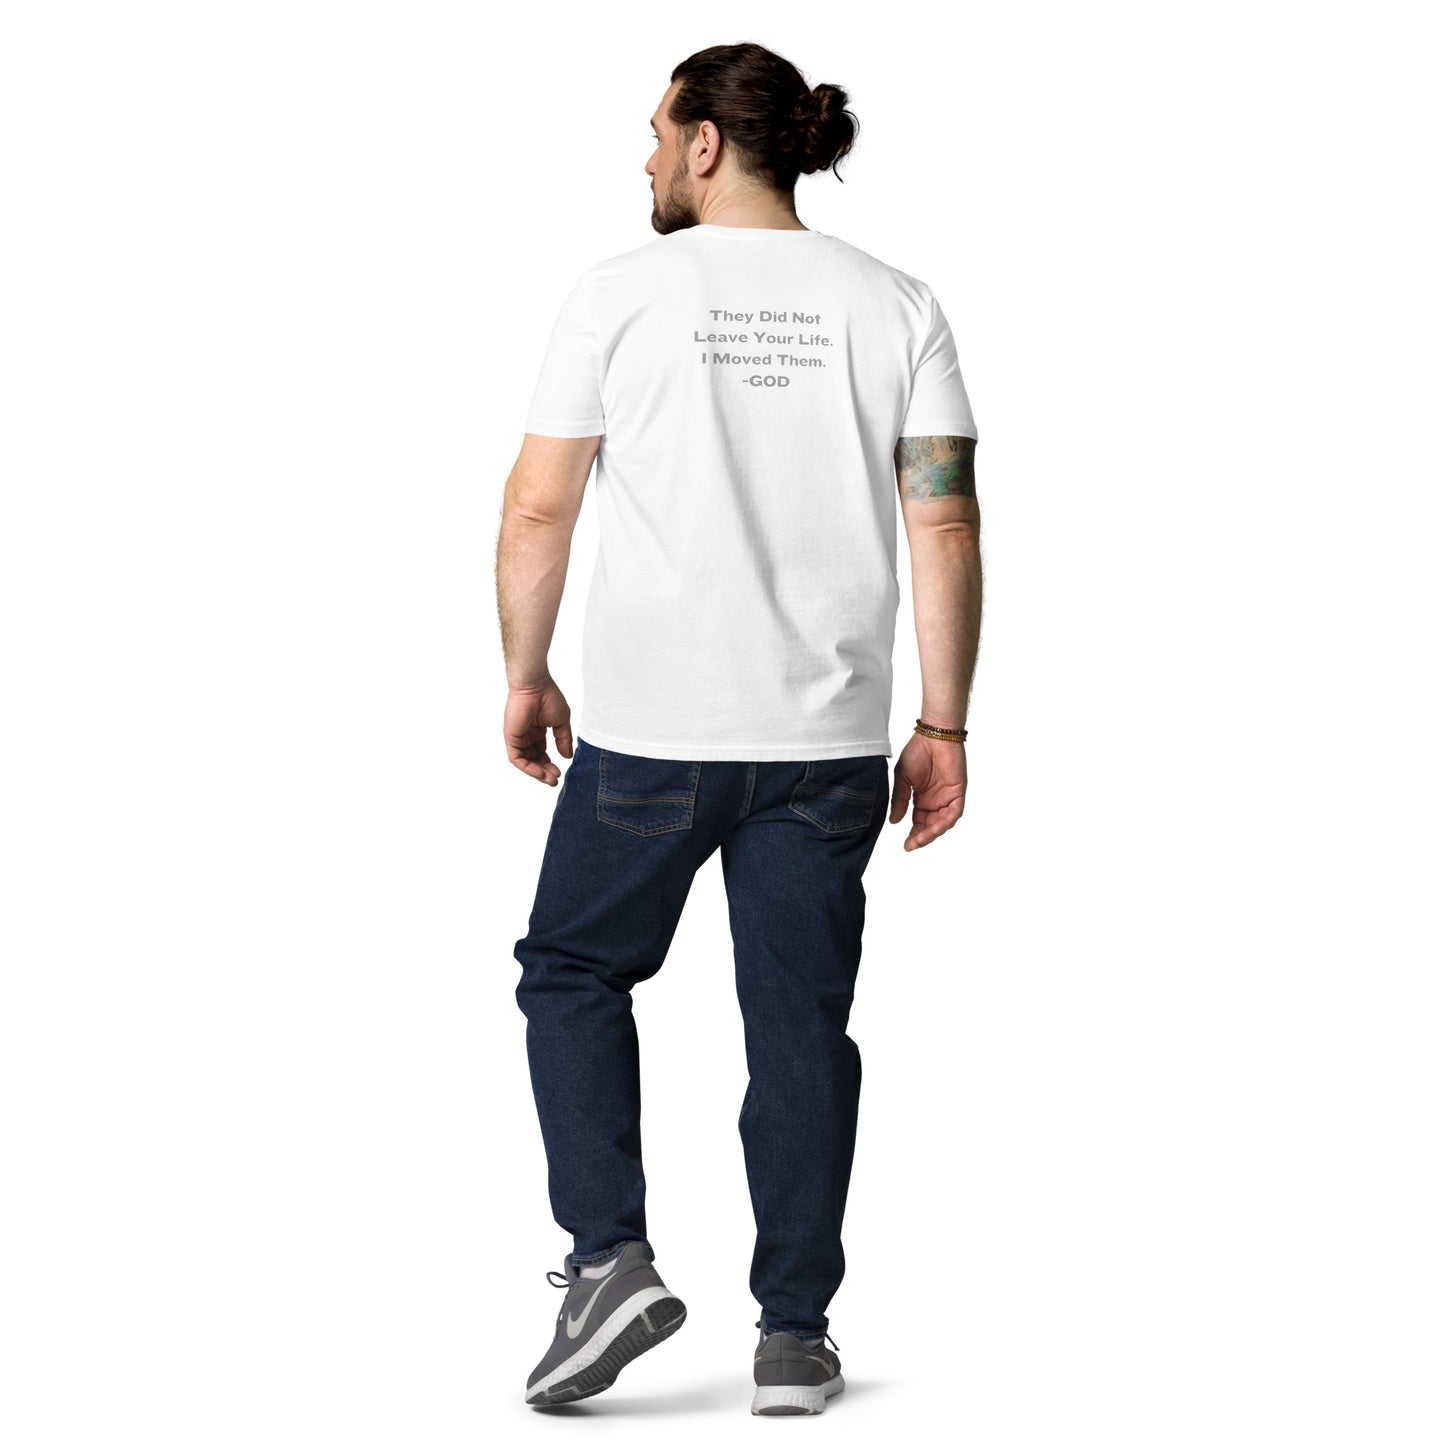 They Did Not Leave Your Life. I Moved Them. - GOD Men's Organic Cotton T-Shirt